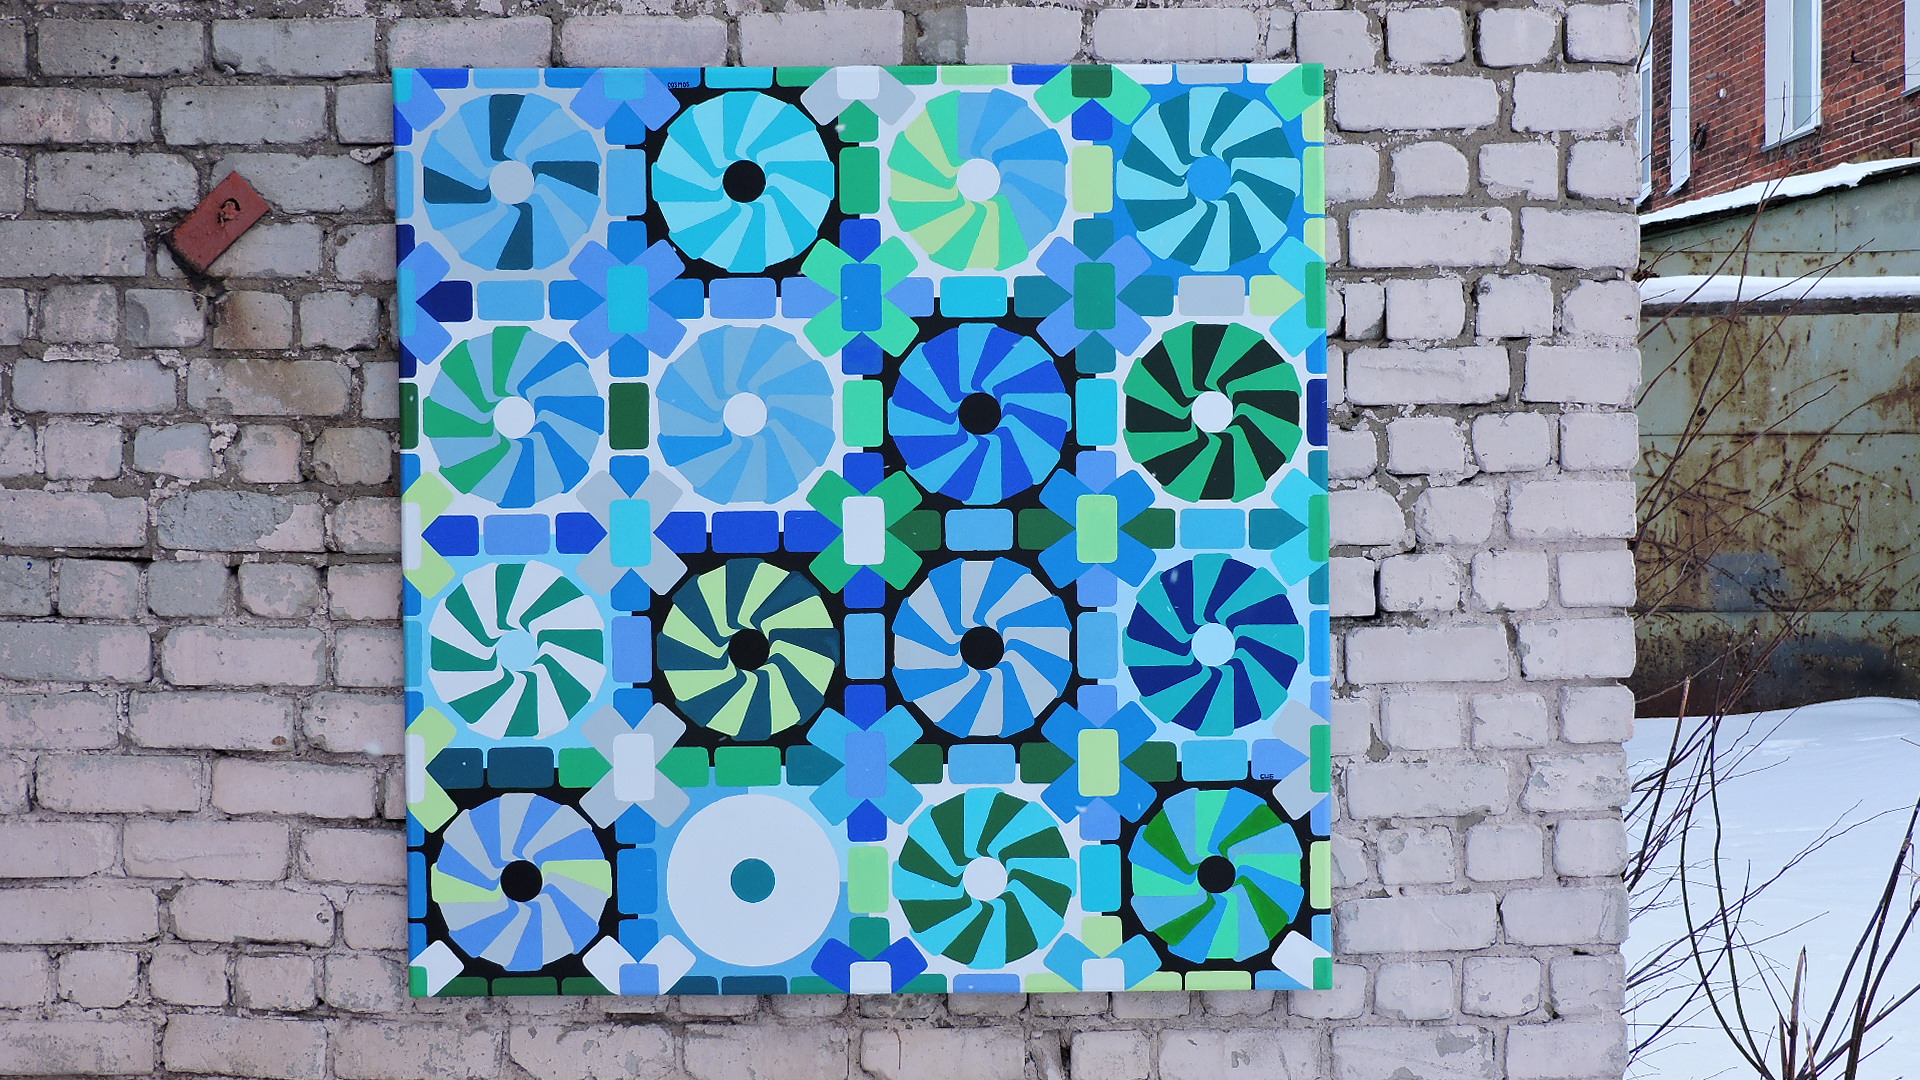 Interior painting, geometric pattern made in shades of green and blue